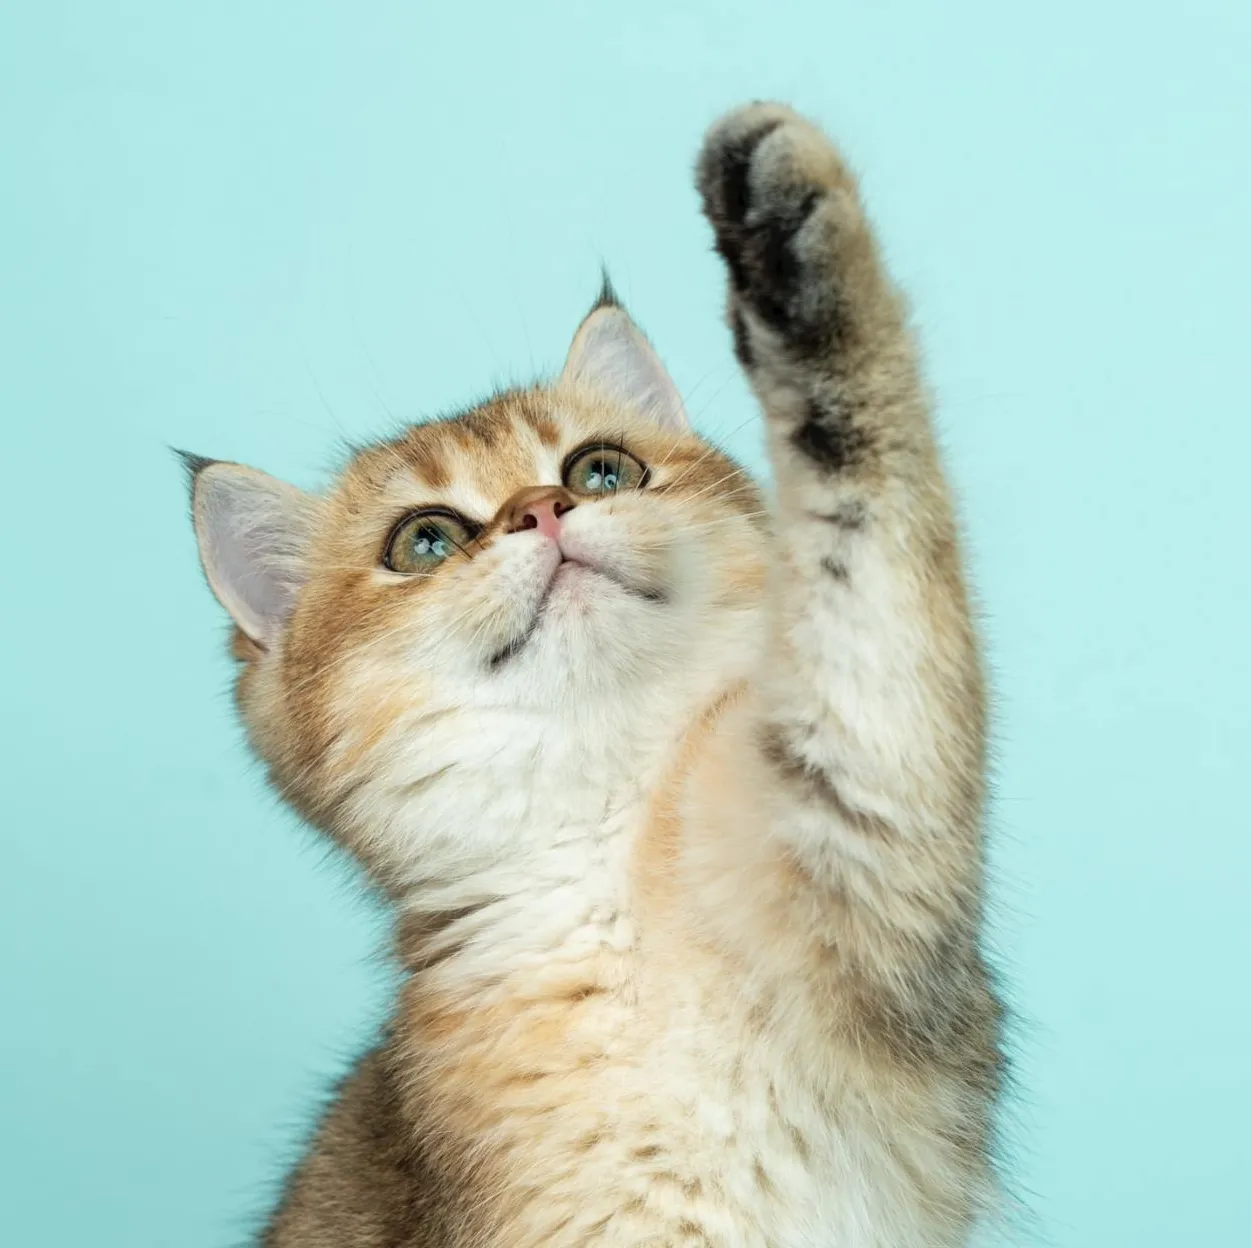 Kitten in front of a light blue background holding up it's paw